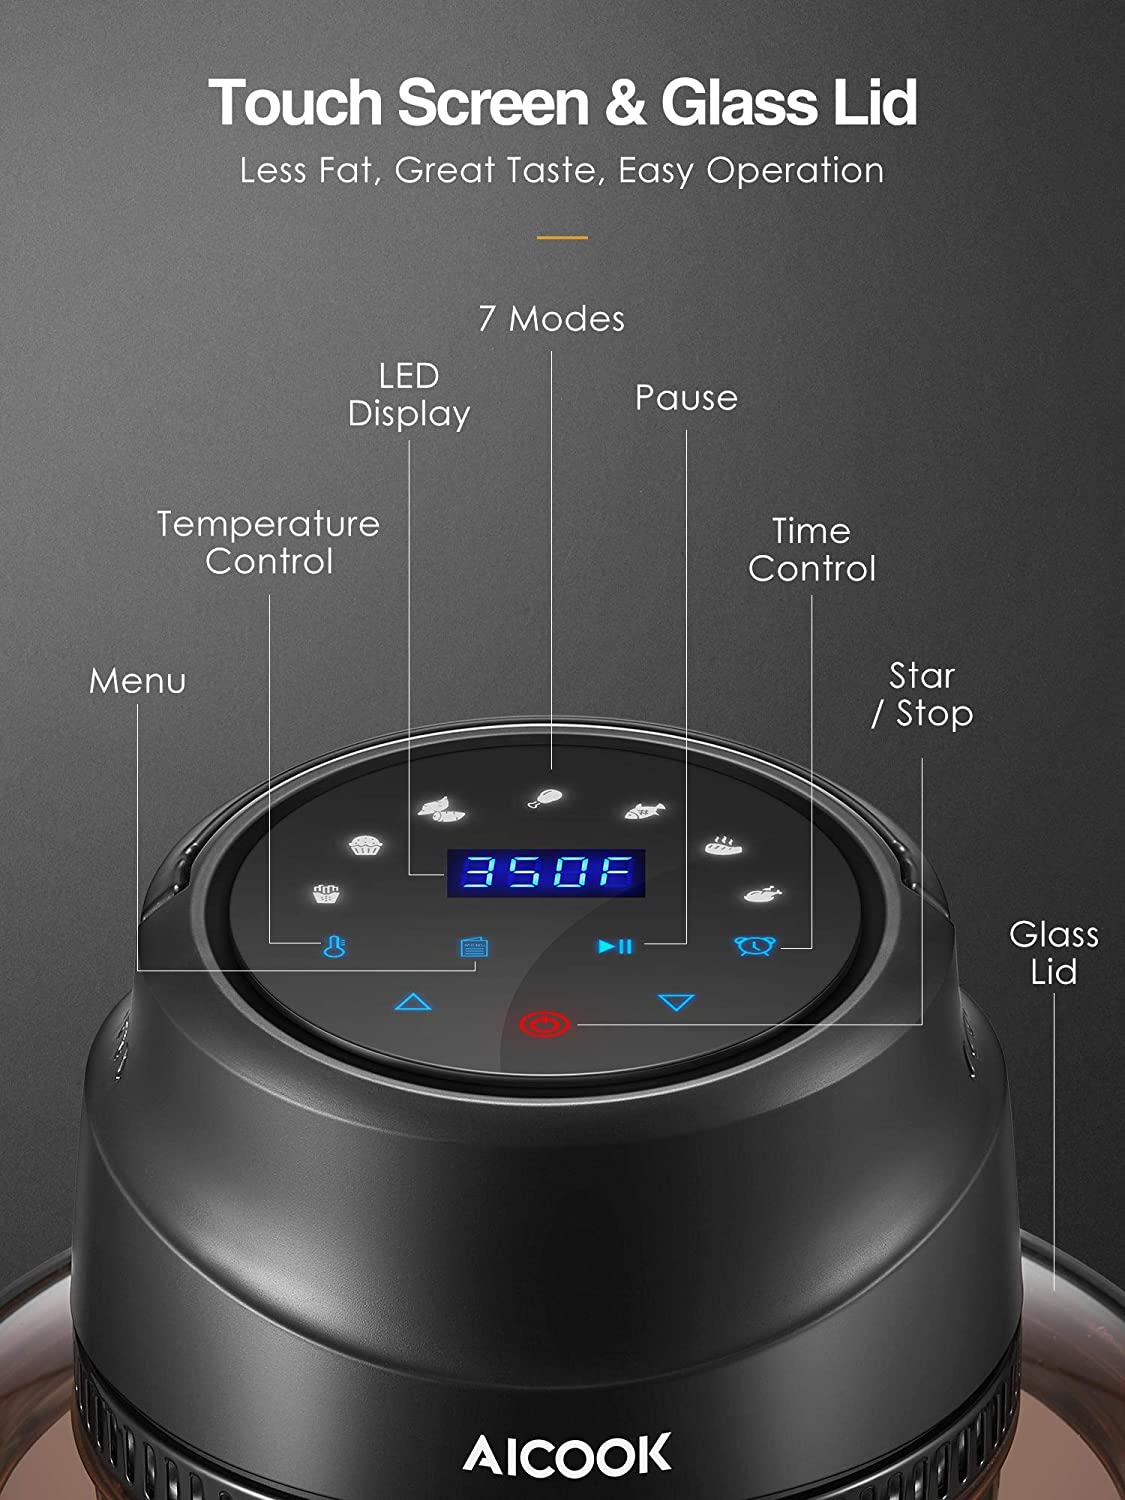 AICOOK | Instant Pot Air Fryer Lid, 7 in 1 Turn Pressure Cooker Into Air Fryer, LED Touchscreen, Accessories and Recipe Included, Touch Screen, Glass Lid